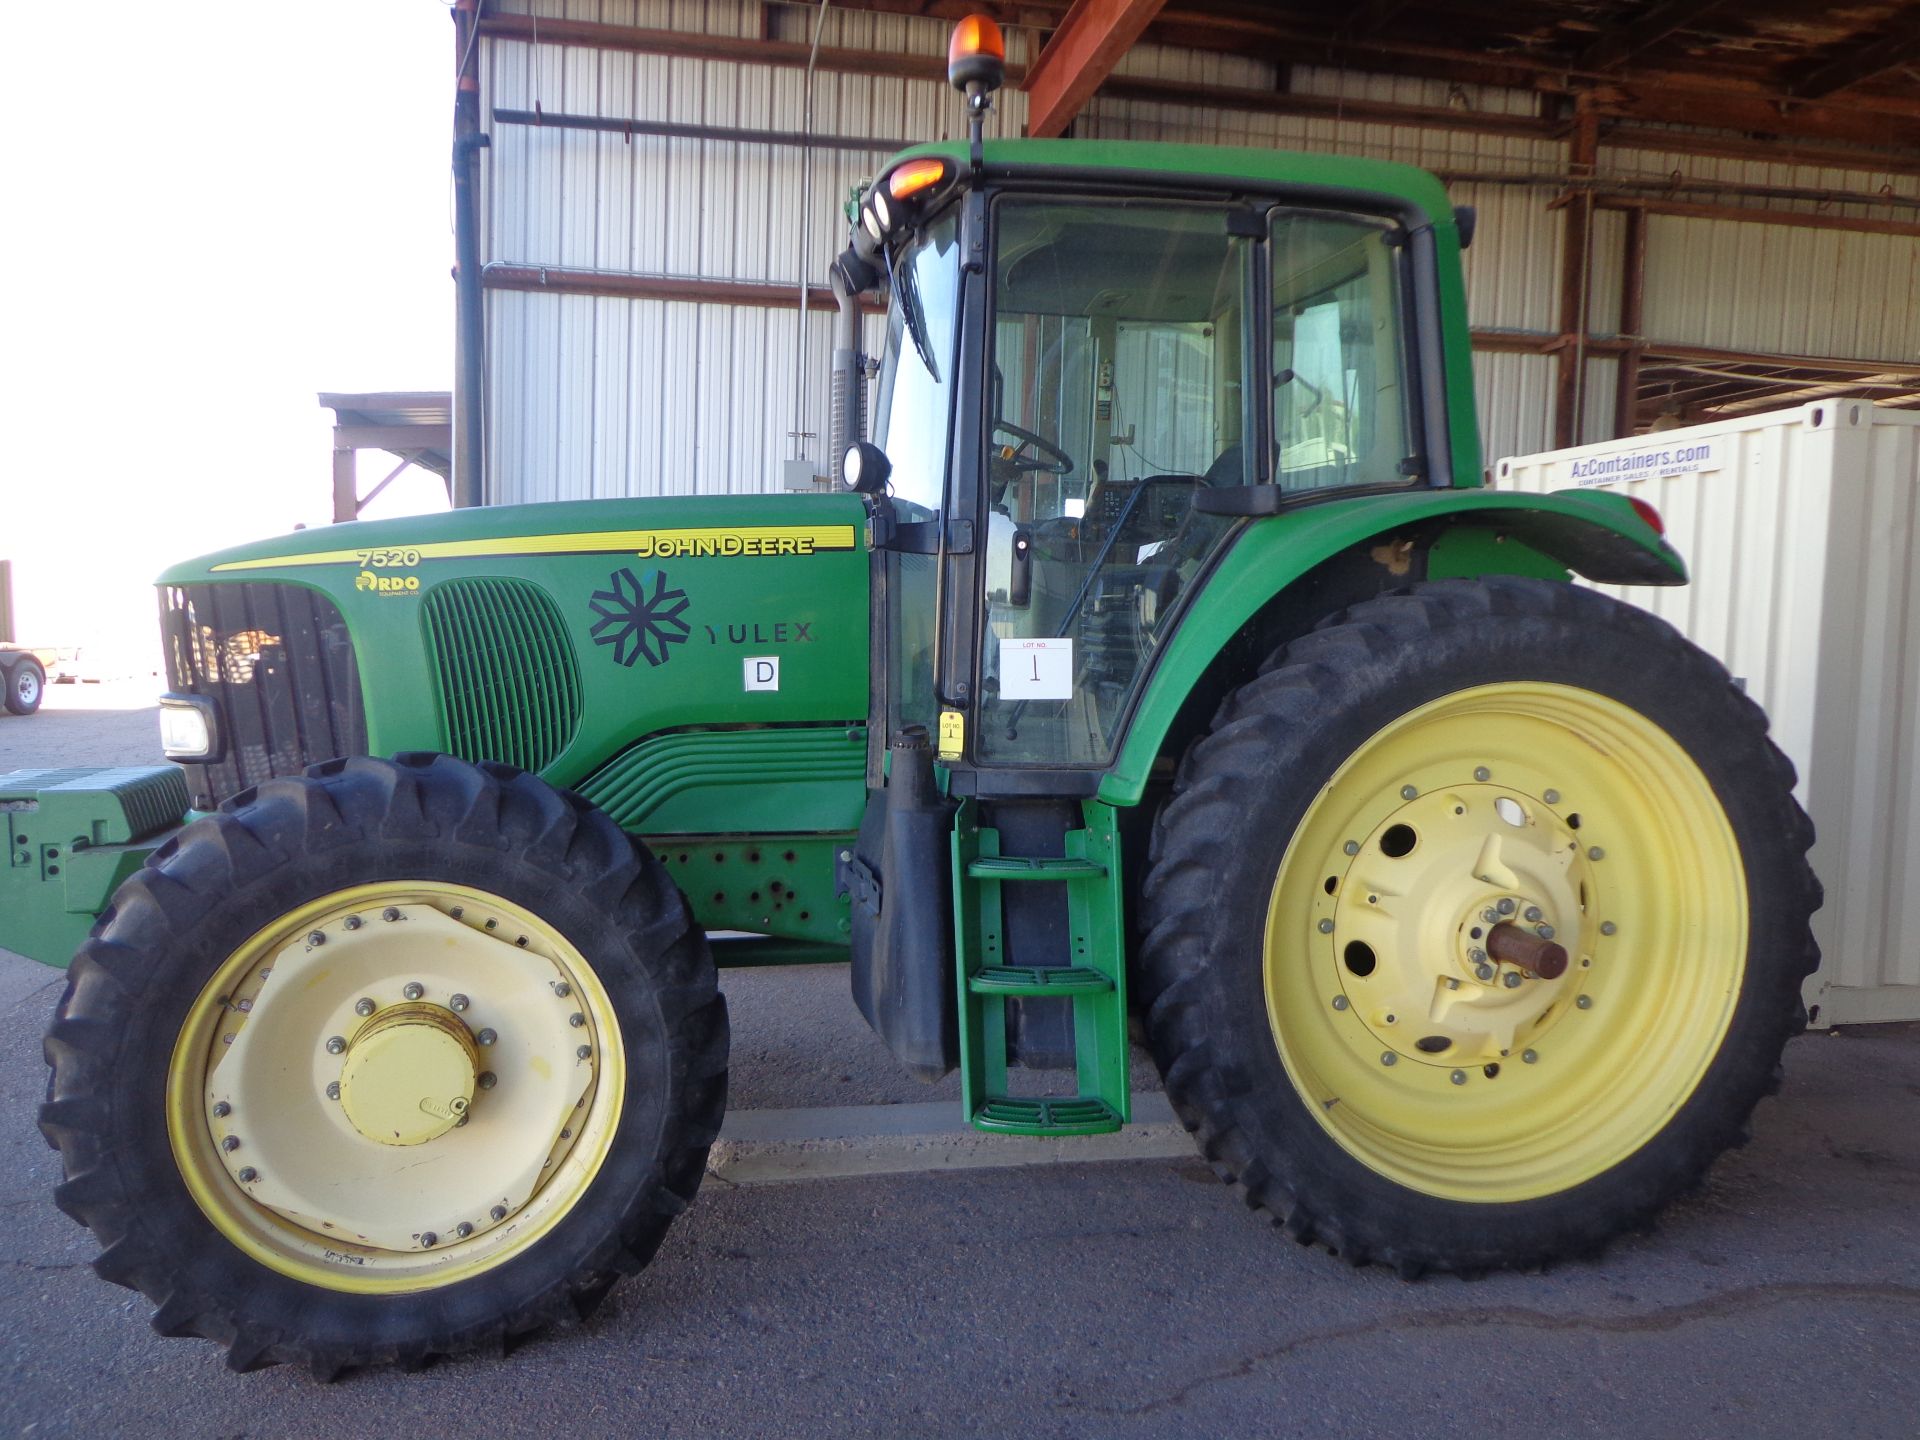 2007 JOHN DEERE 7520 TRACTOR, 4WD, CAB, AC, STEREO PIN. RW7520R061880  3852.8 HRS. - Image 5 of 6